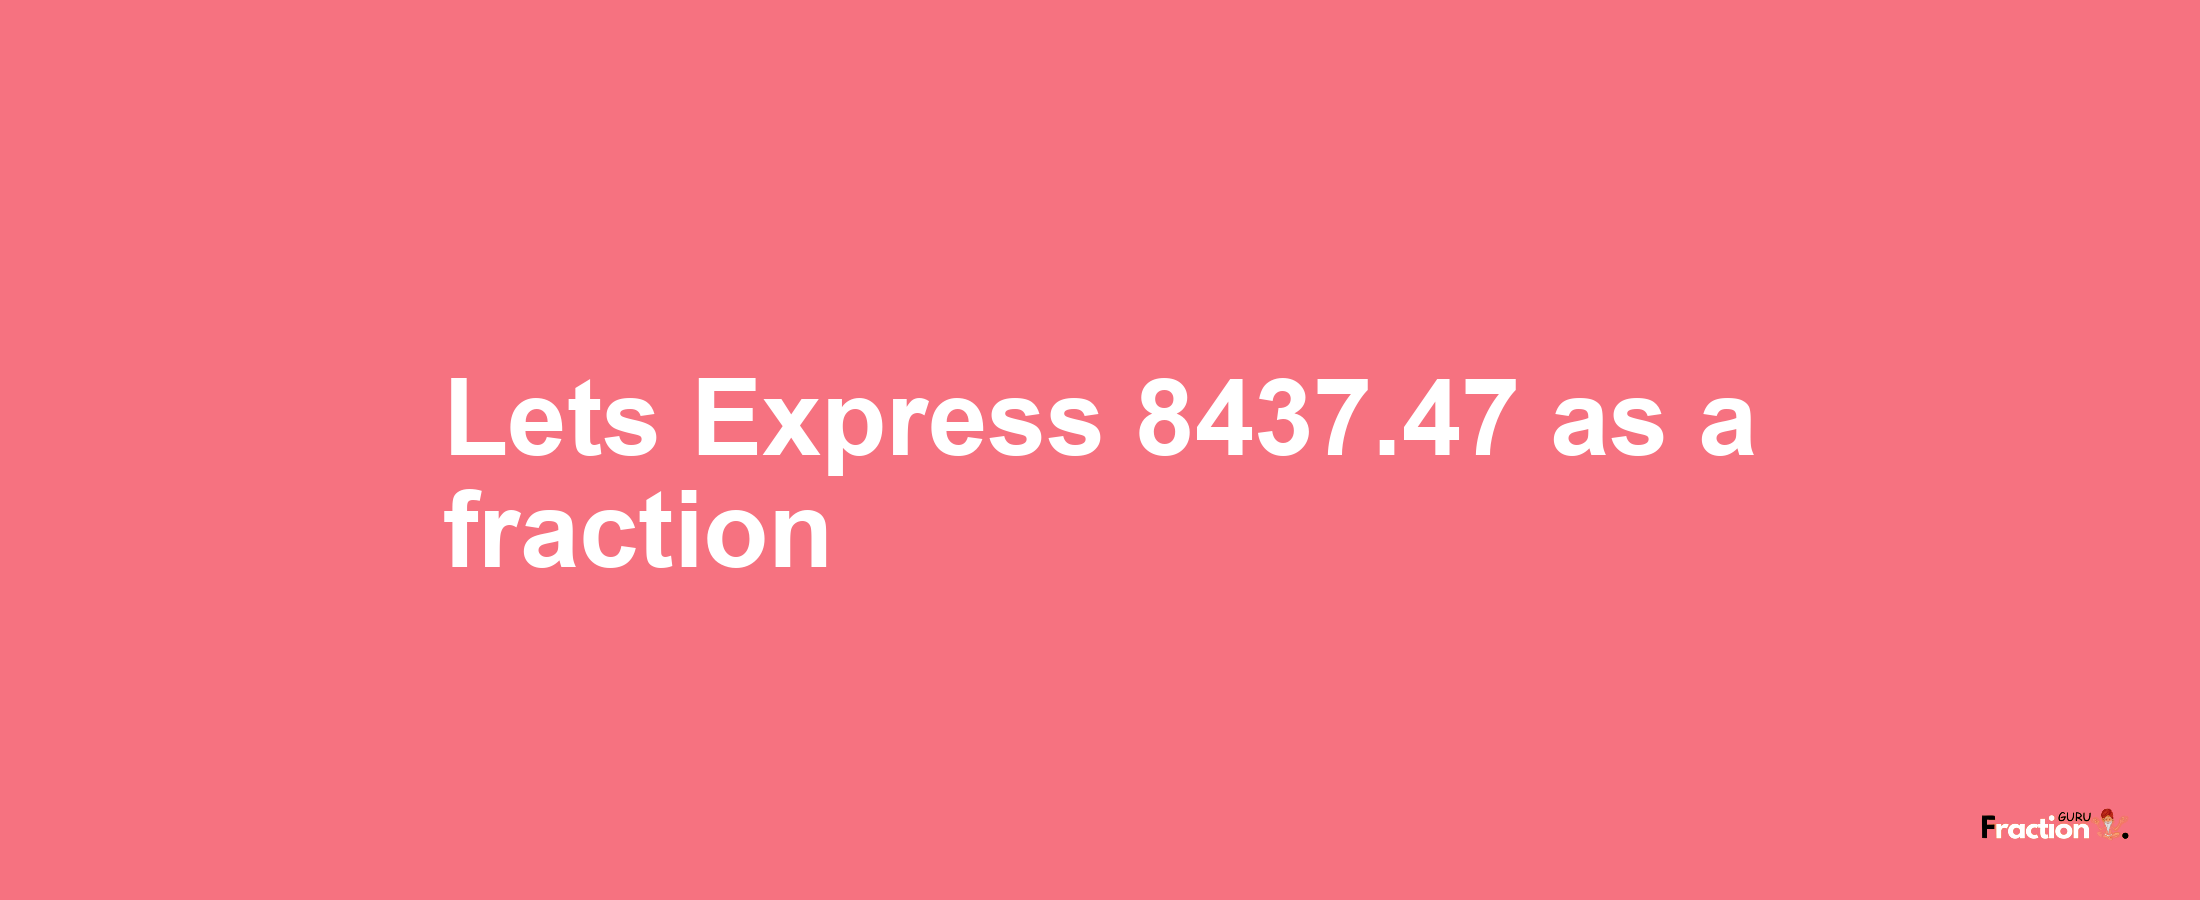 Lets Express 8437.47 as afraction